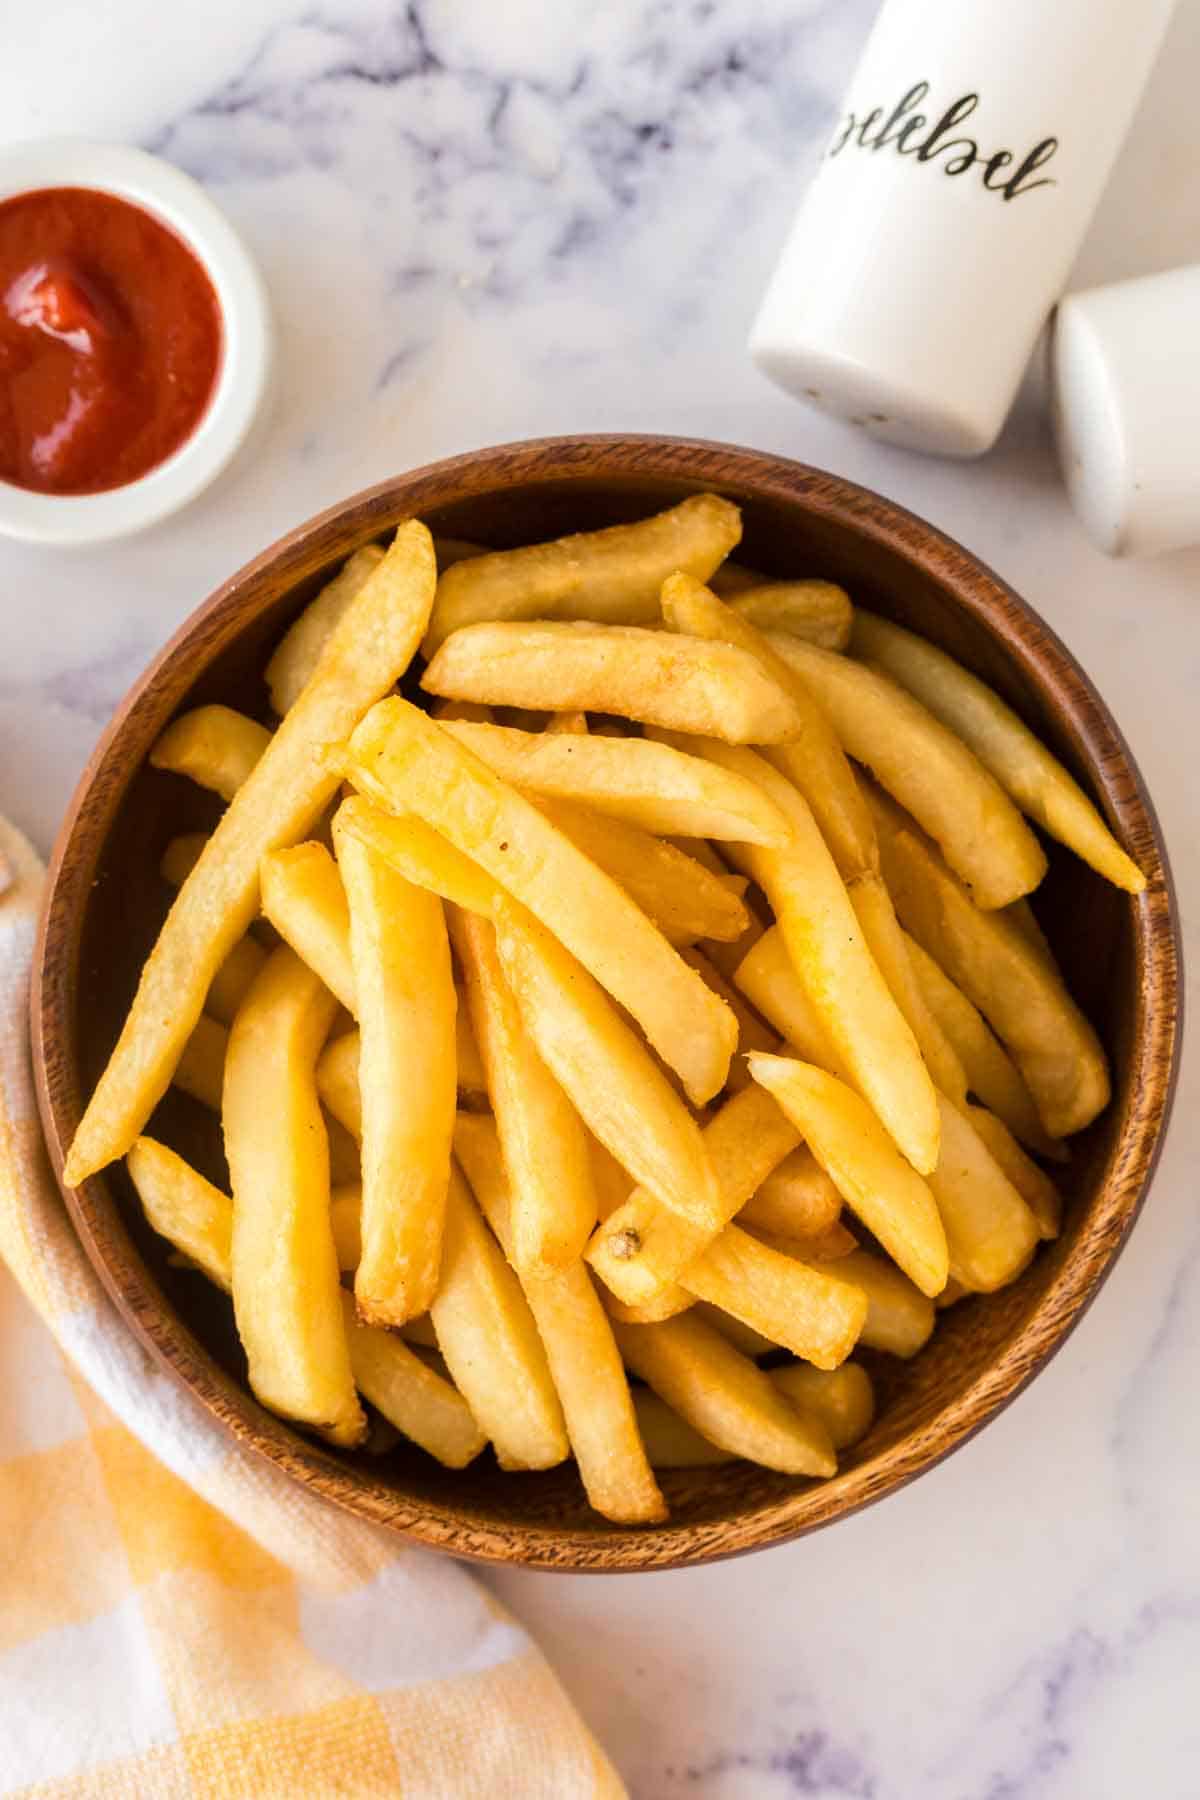 air fryer frozen french fries in a round wooden bowl with a dish of ketchup.